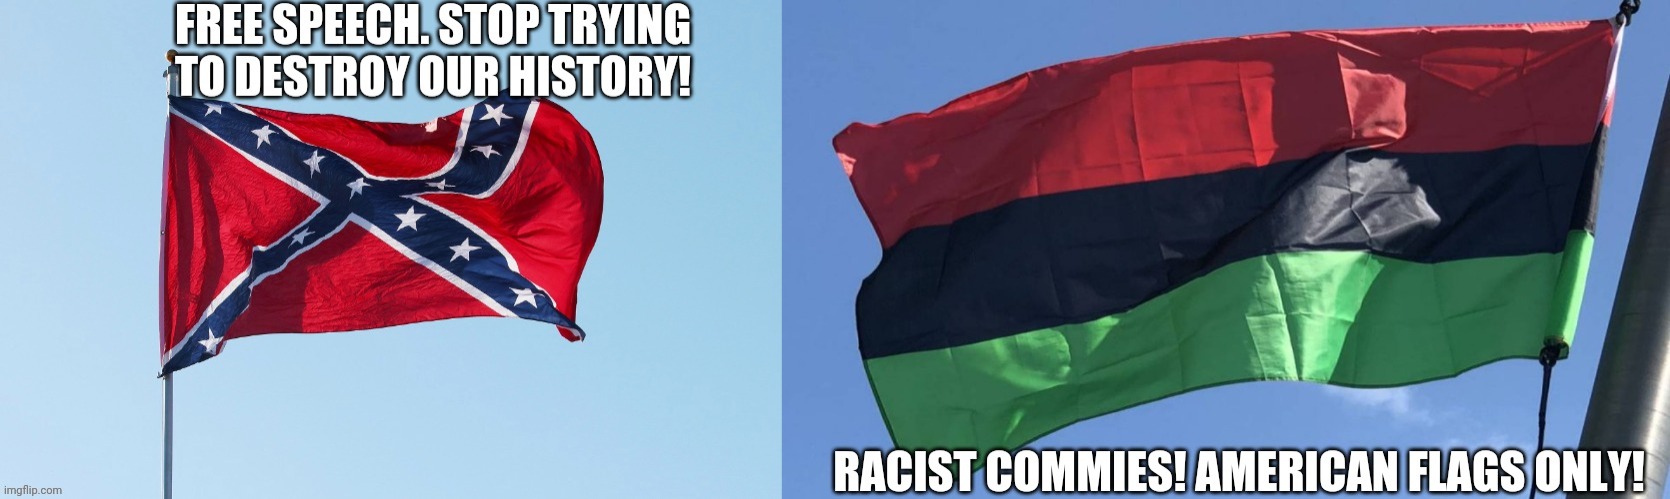 Trump supporters on Confederate flag and Pan African flag | image tagged in confederate flag | made w/ Imgflip meme maker